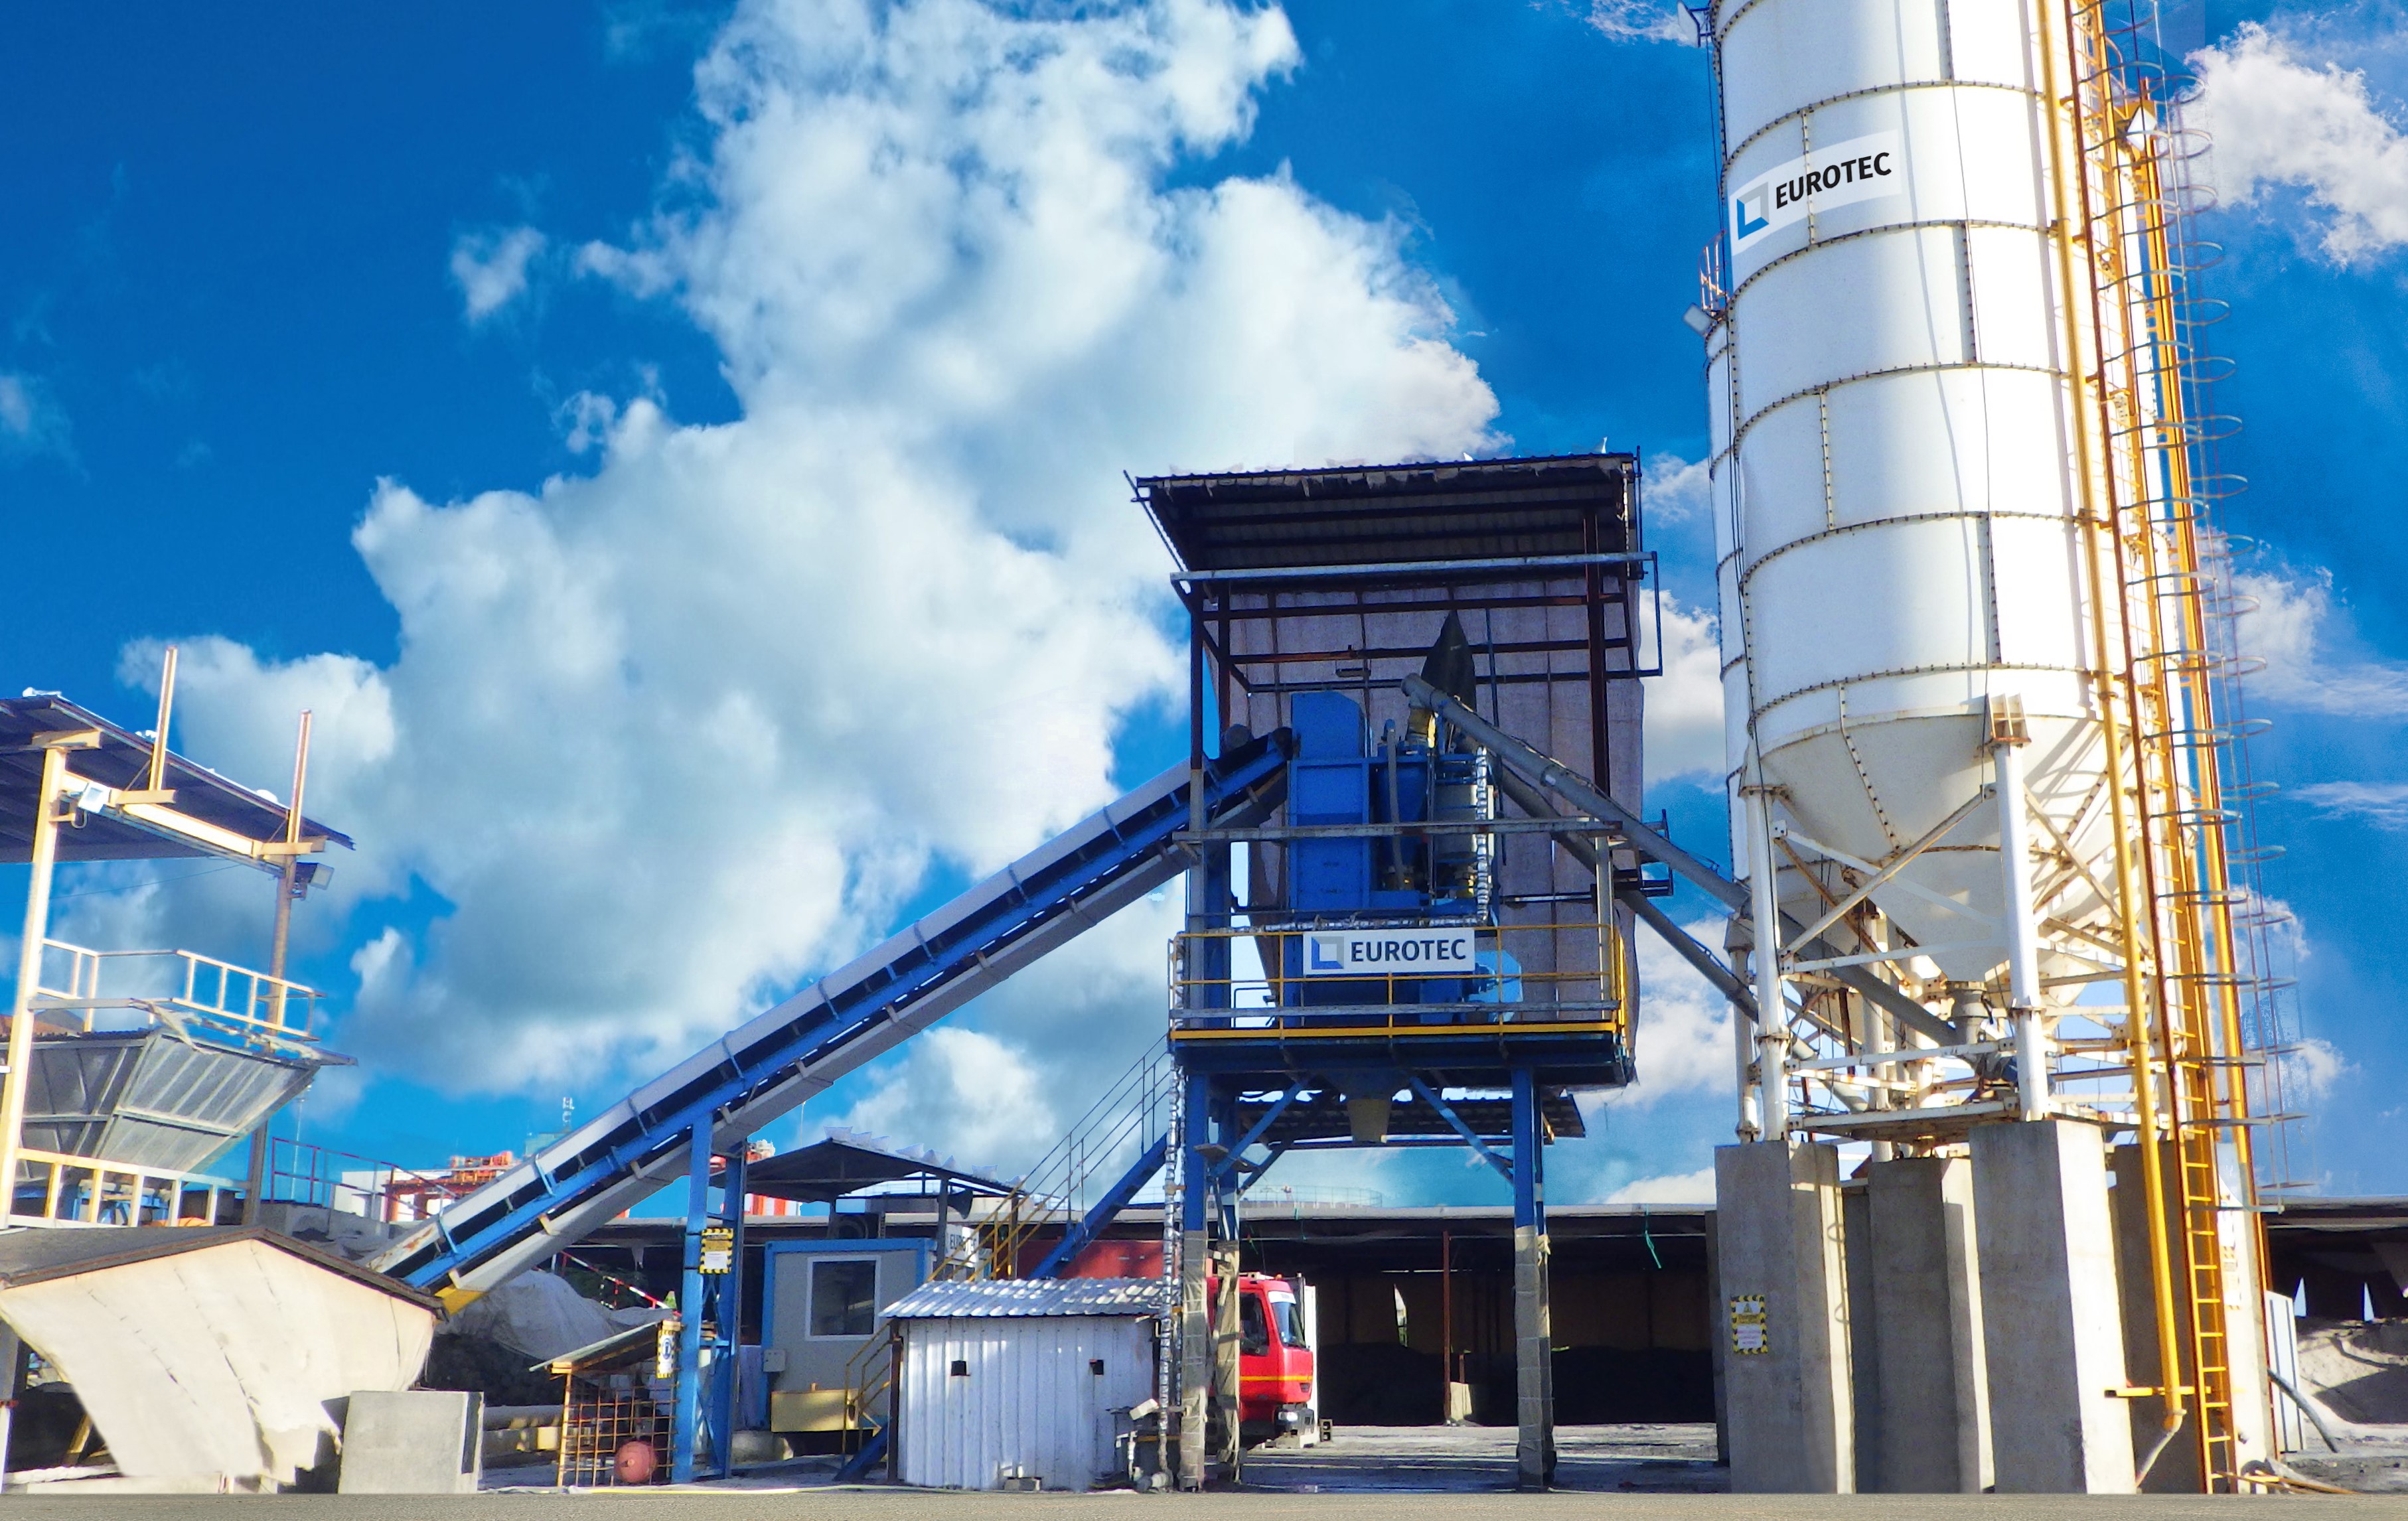  A Eurotec batching plant has played an important role in development of a port facility in Madagascar